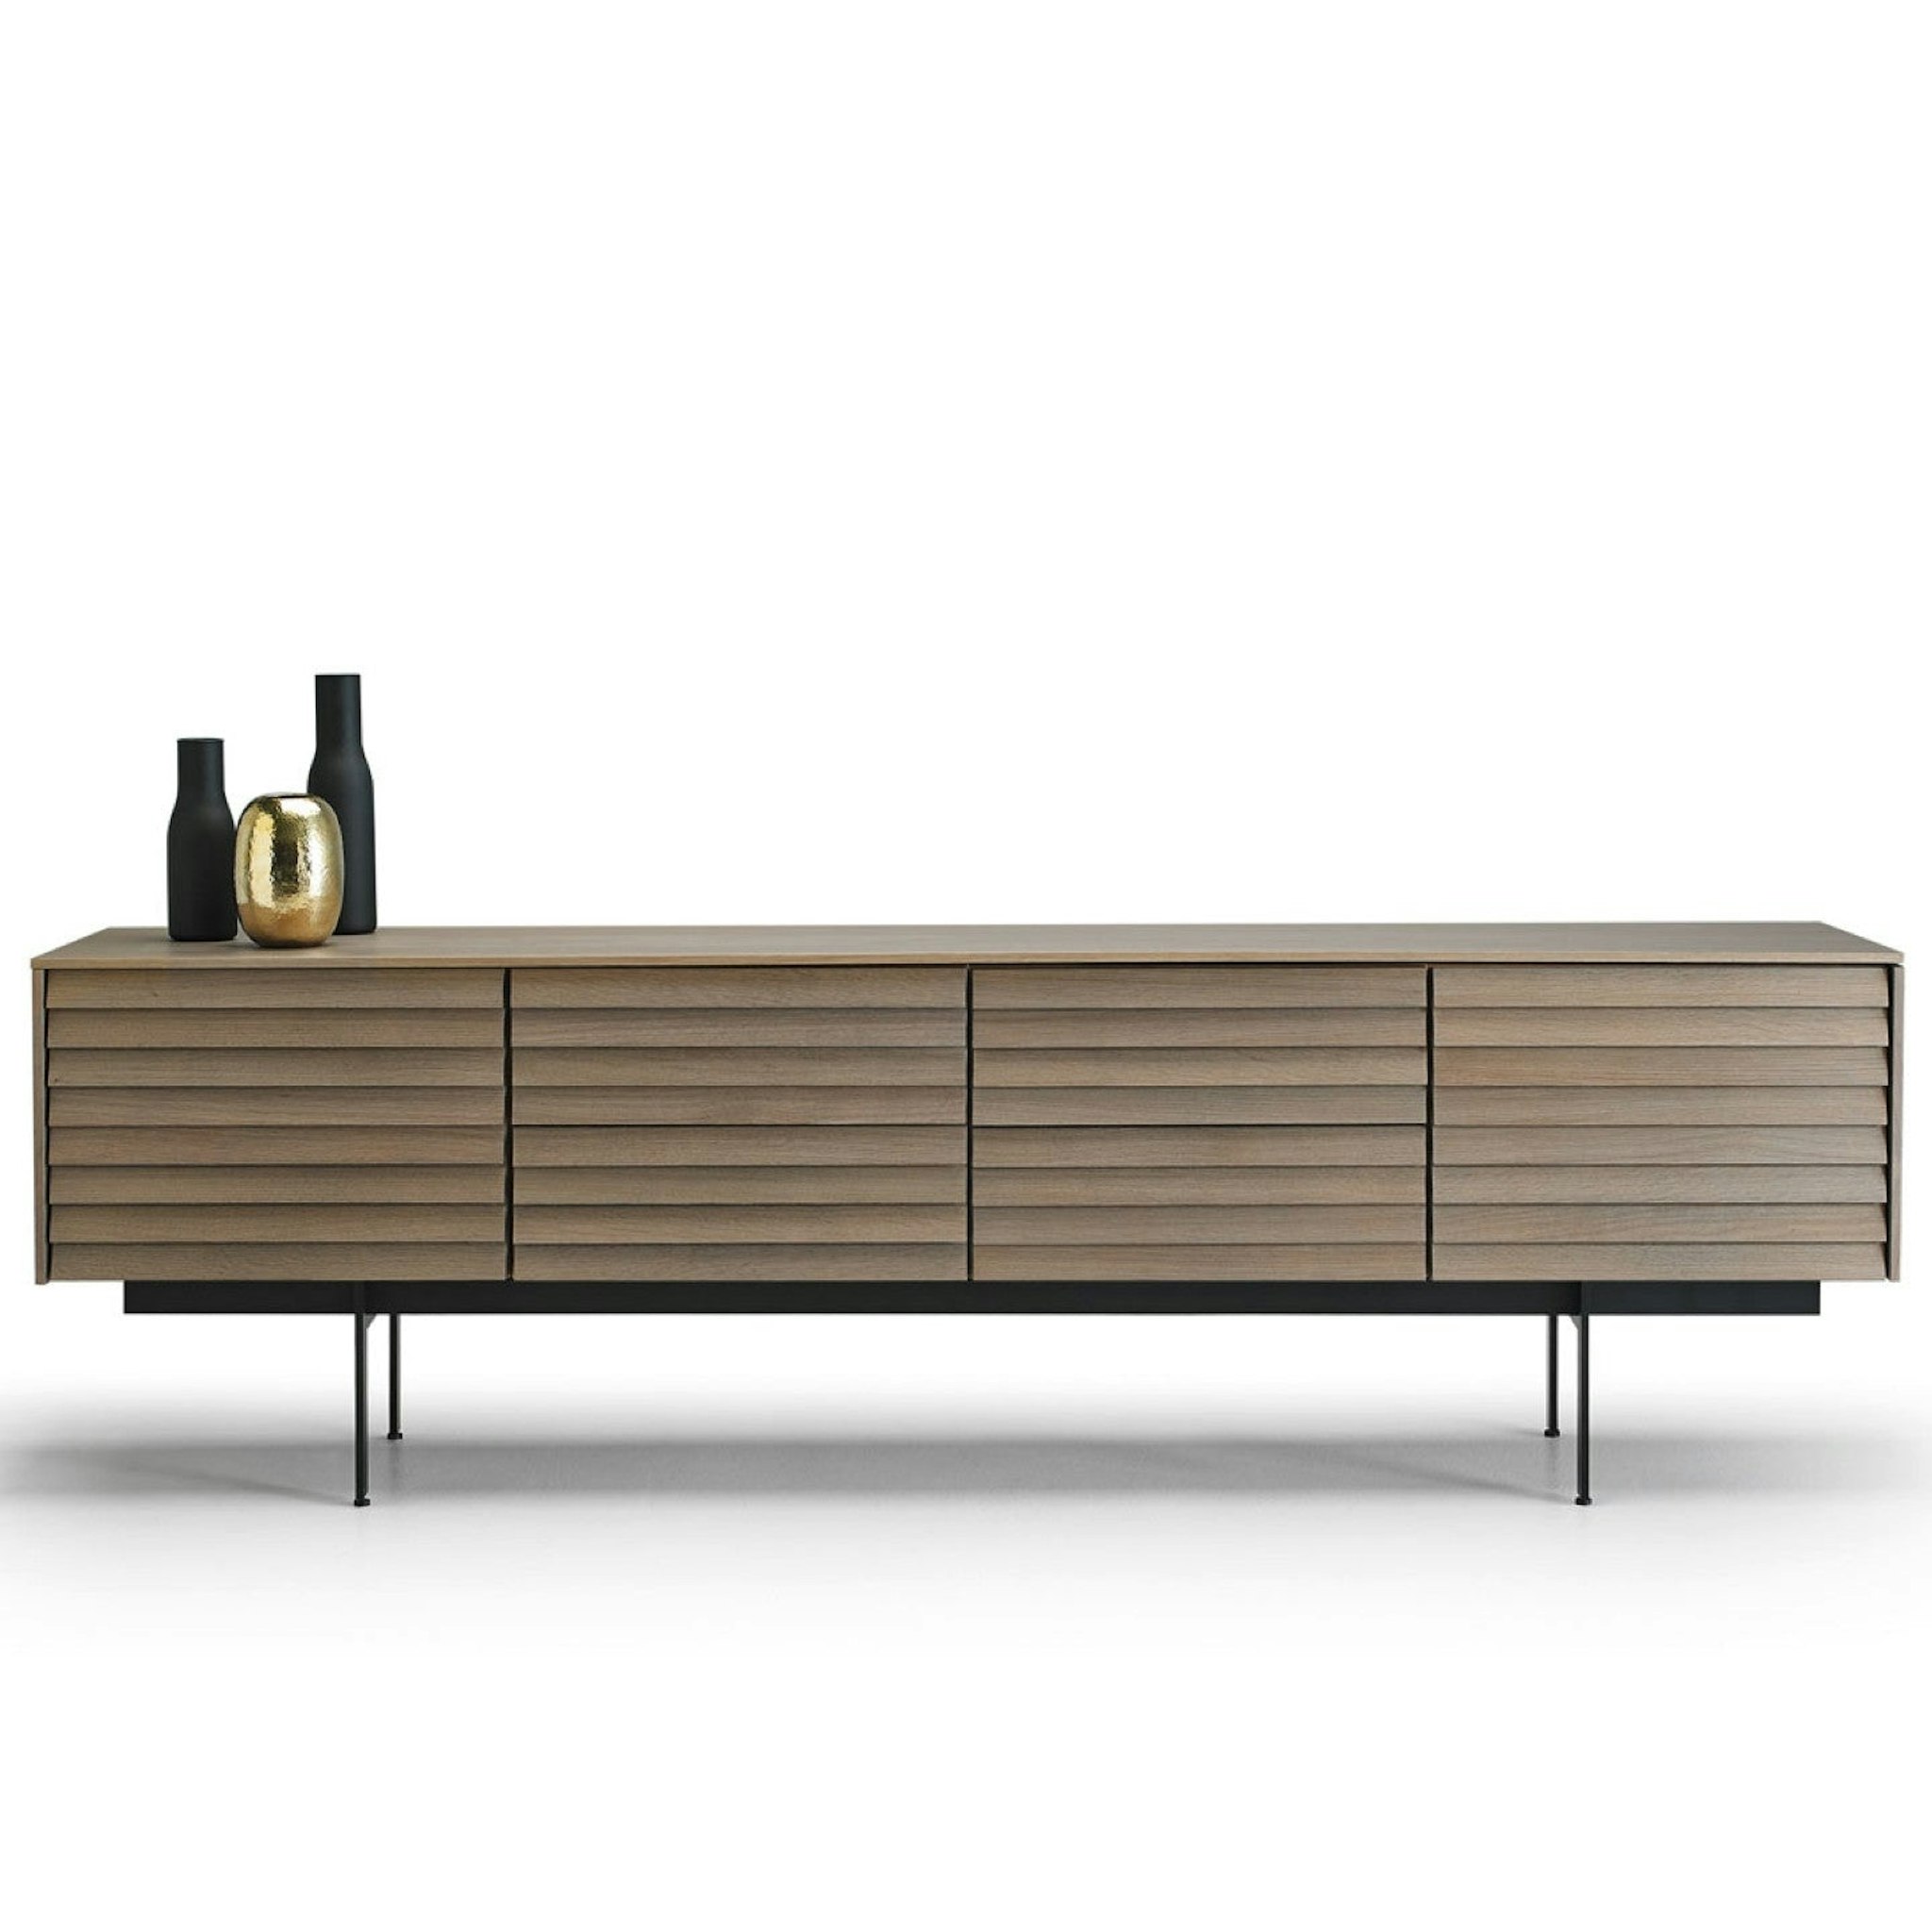 Sussex Sideboard by Punt